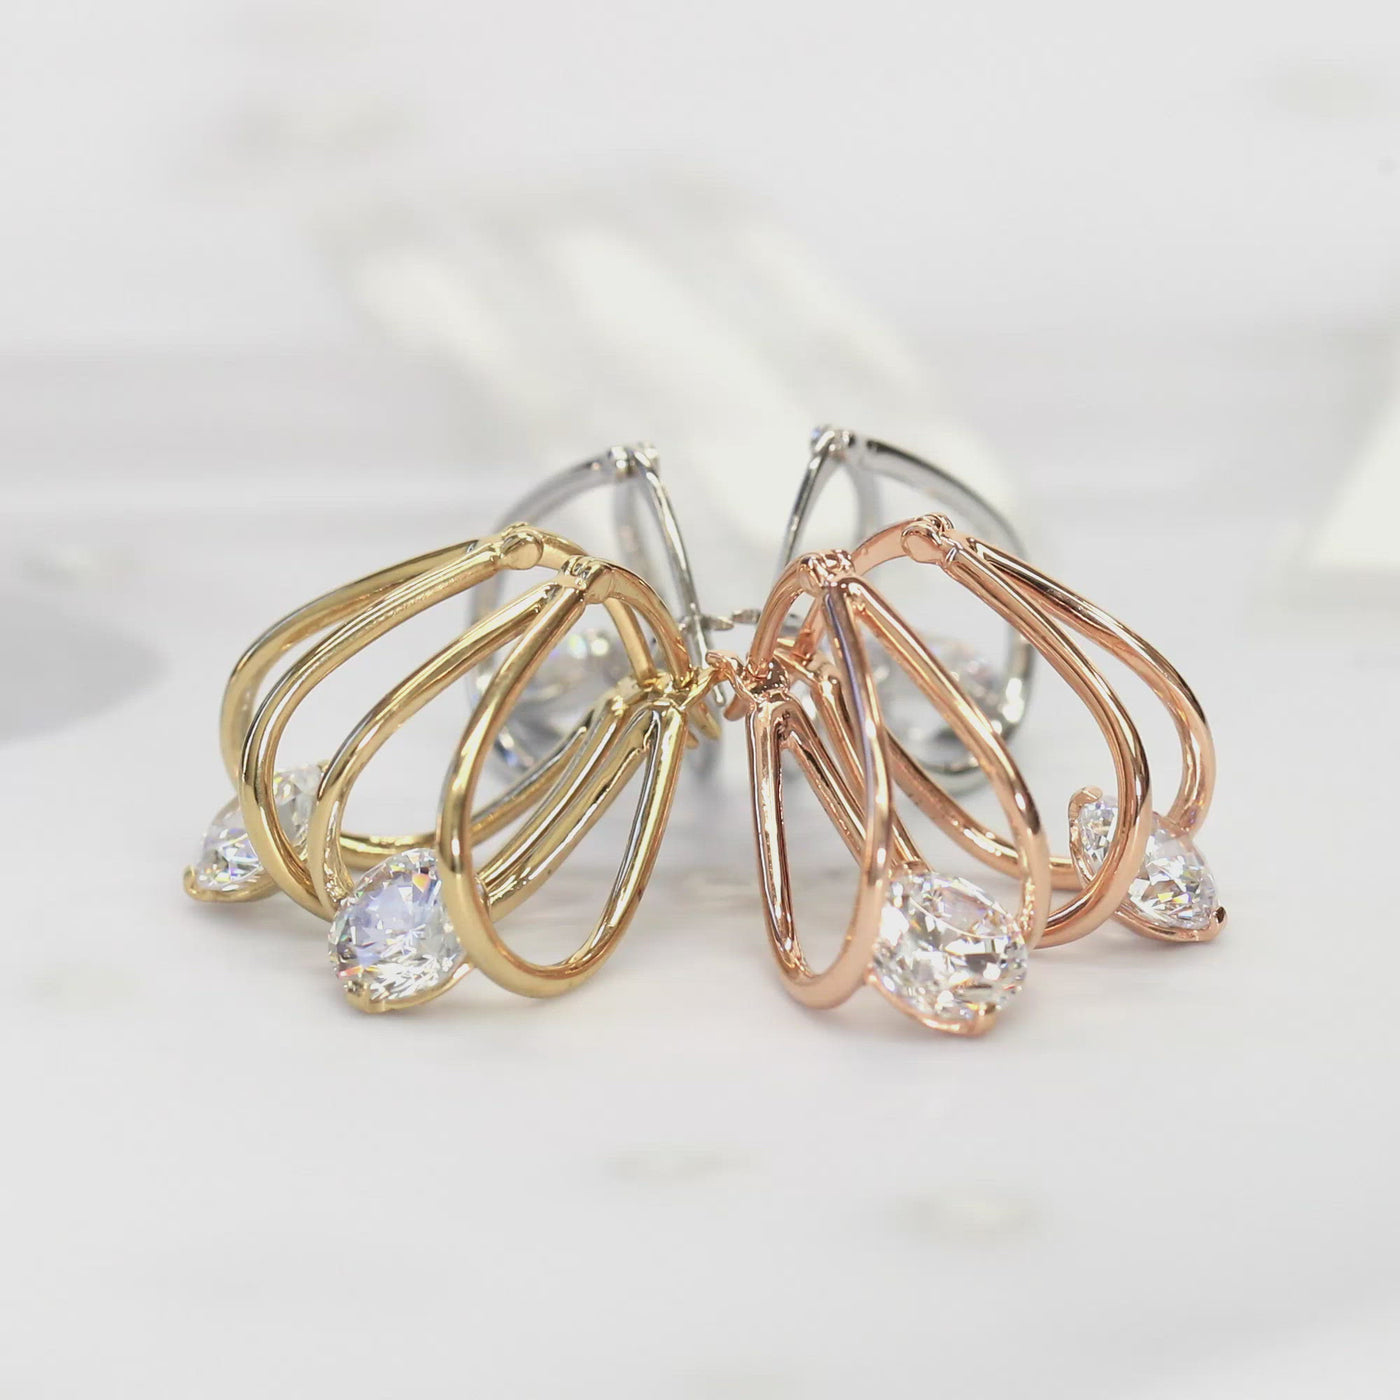 1.25 CT Invisible Set Hoop Earrings, 14K Gold Plated Sterling Silver